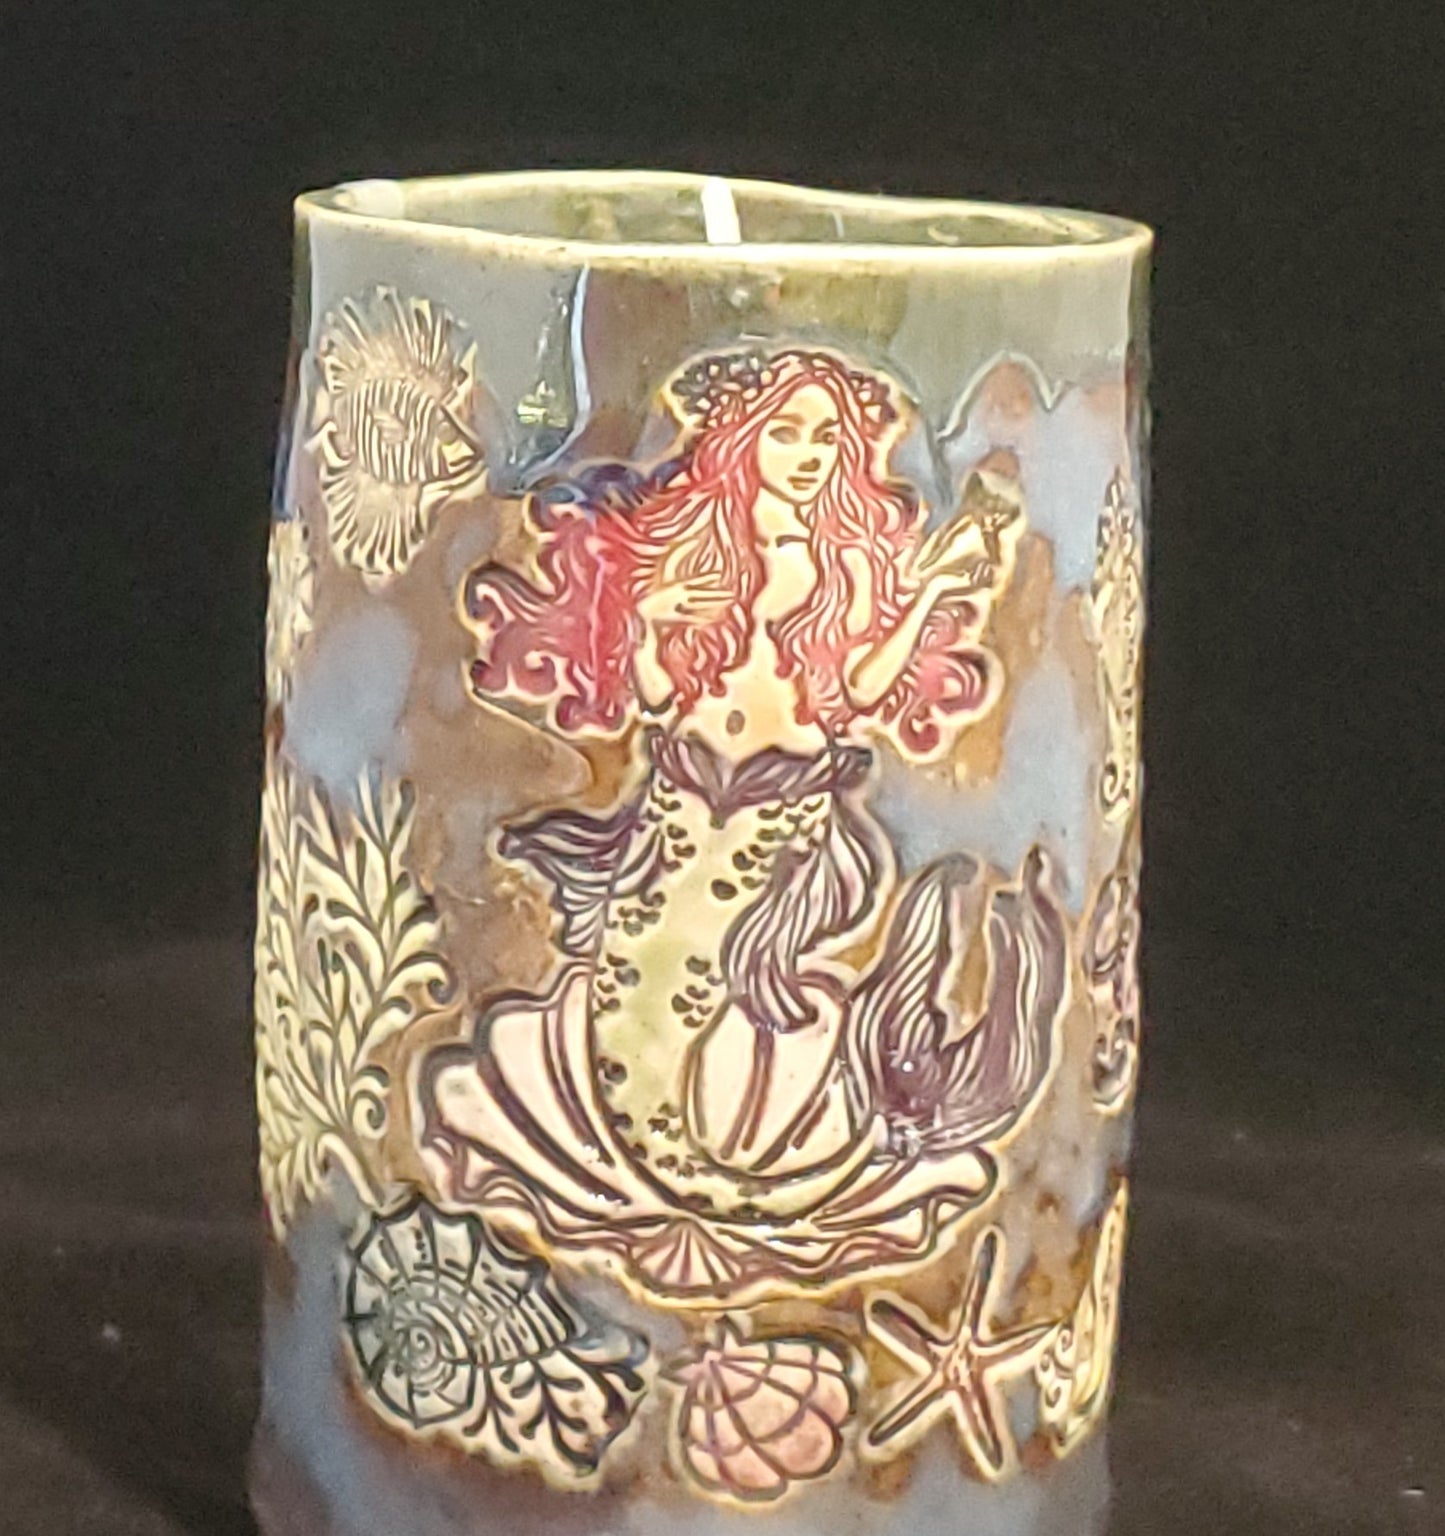 Ariel's Grotto Large Candle (Cocoanut Lime Scented)